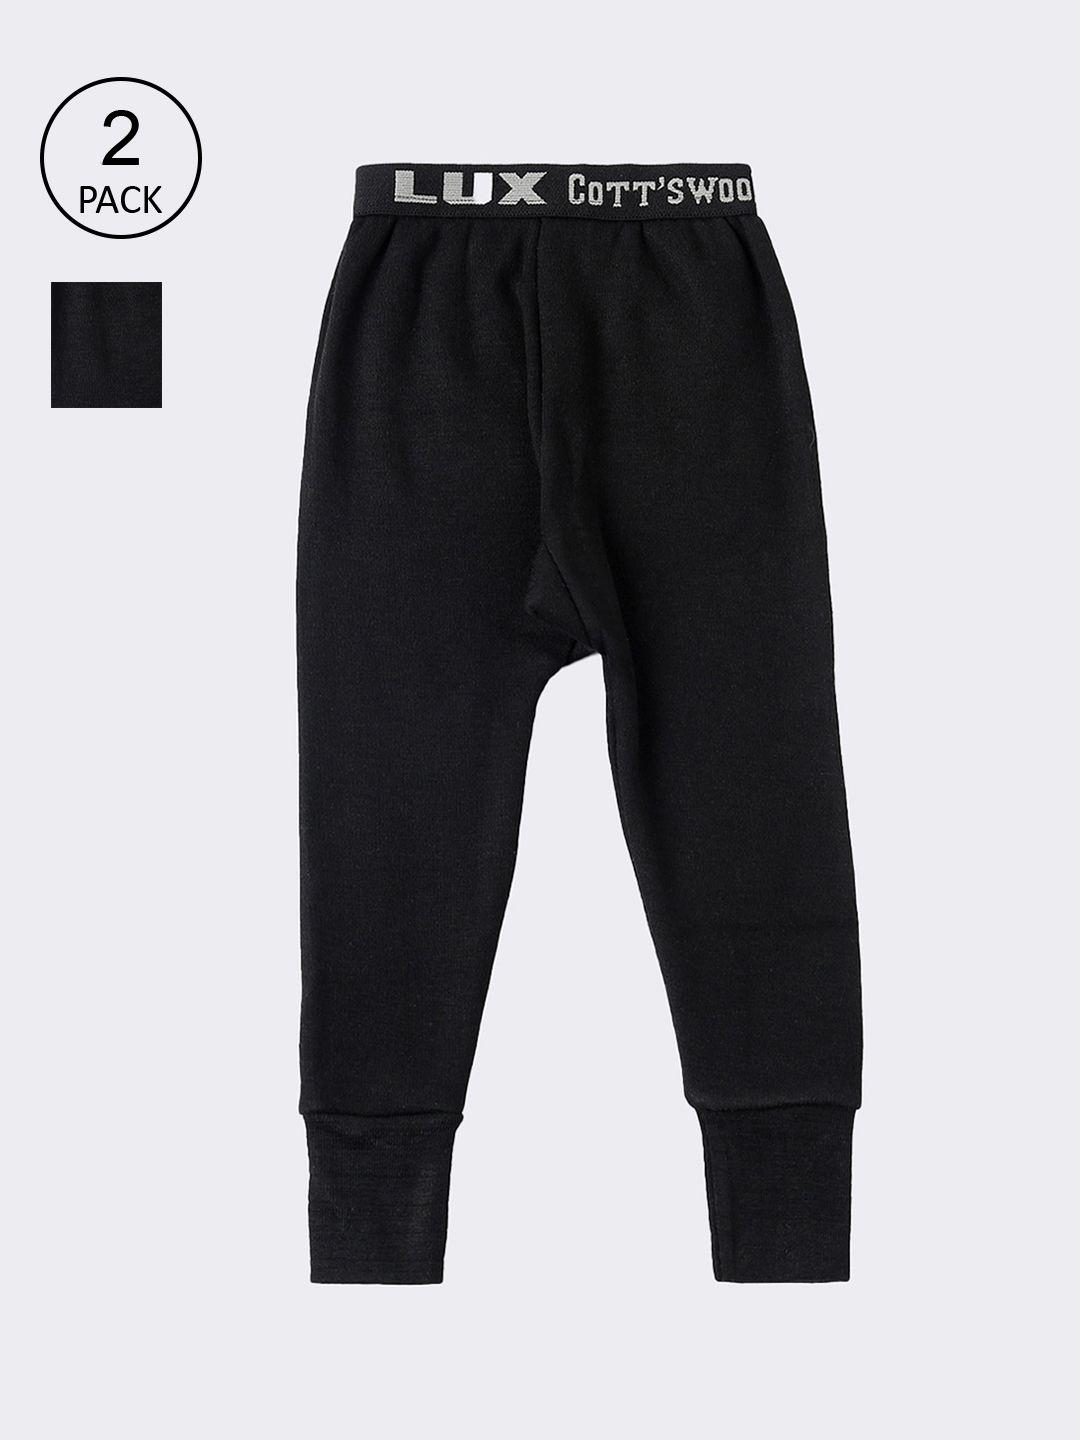 lux cottswool boys pack of 2 black solid cotton thermal bottoms